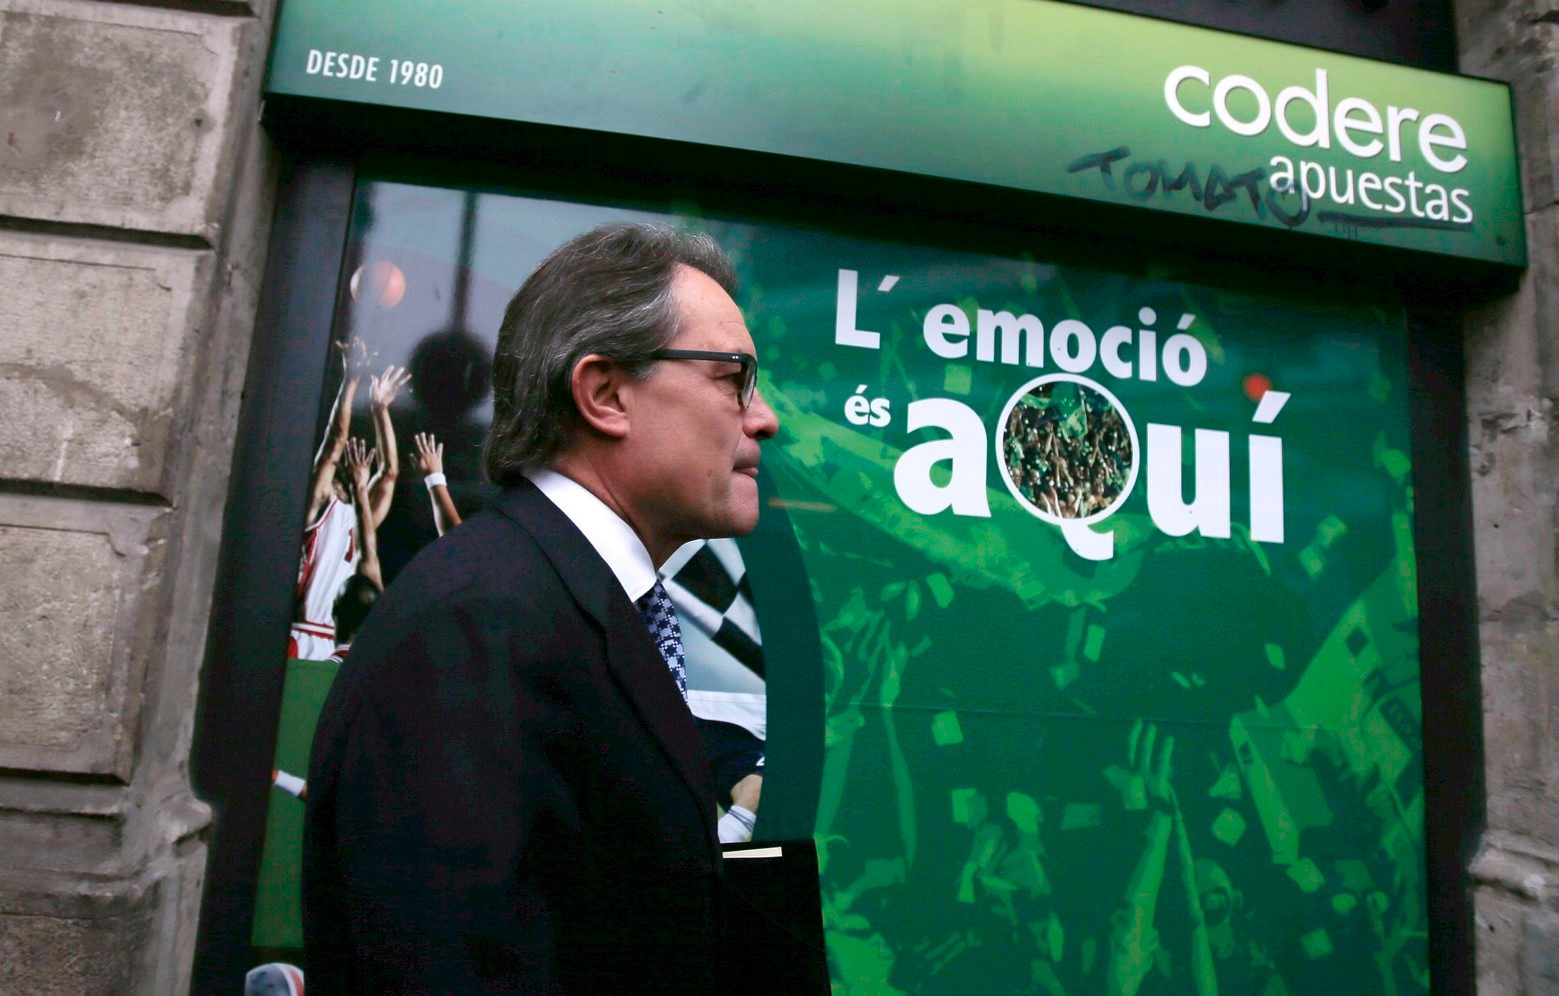 Acting regional President Artur Mas walks past a betting shop with a banner reading in Catalan: "The excitement is here" in Barcelona, Spain, Monday, Jan. 4, 2016. Catalonia's two main pro-independence parties will meet to discuss how to salvage their secessionist drive after a key far-left party refused to back the re-election of incumbent regional leader Artur Mas. Mas' ruling conservative Convergence party and the Republican Left of Catalonia group joined forces under the "Together for Yes" alliance to win 62 seats in the 135-seat regional parliament last September. But they needed the support of the far-left CUP's 10 seats to secure Mas a workable majority and further the independence push. (AP Photo/Manu Fernandez) Spain Catalonia Independence